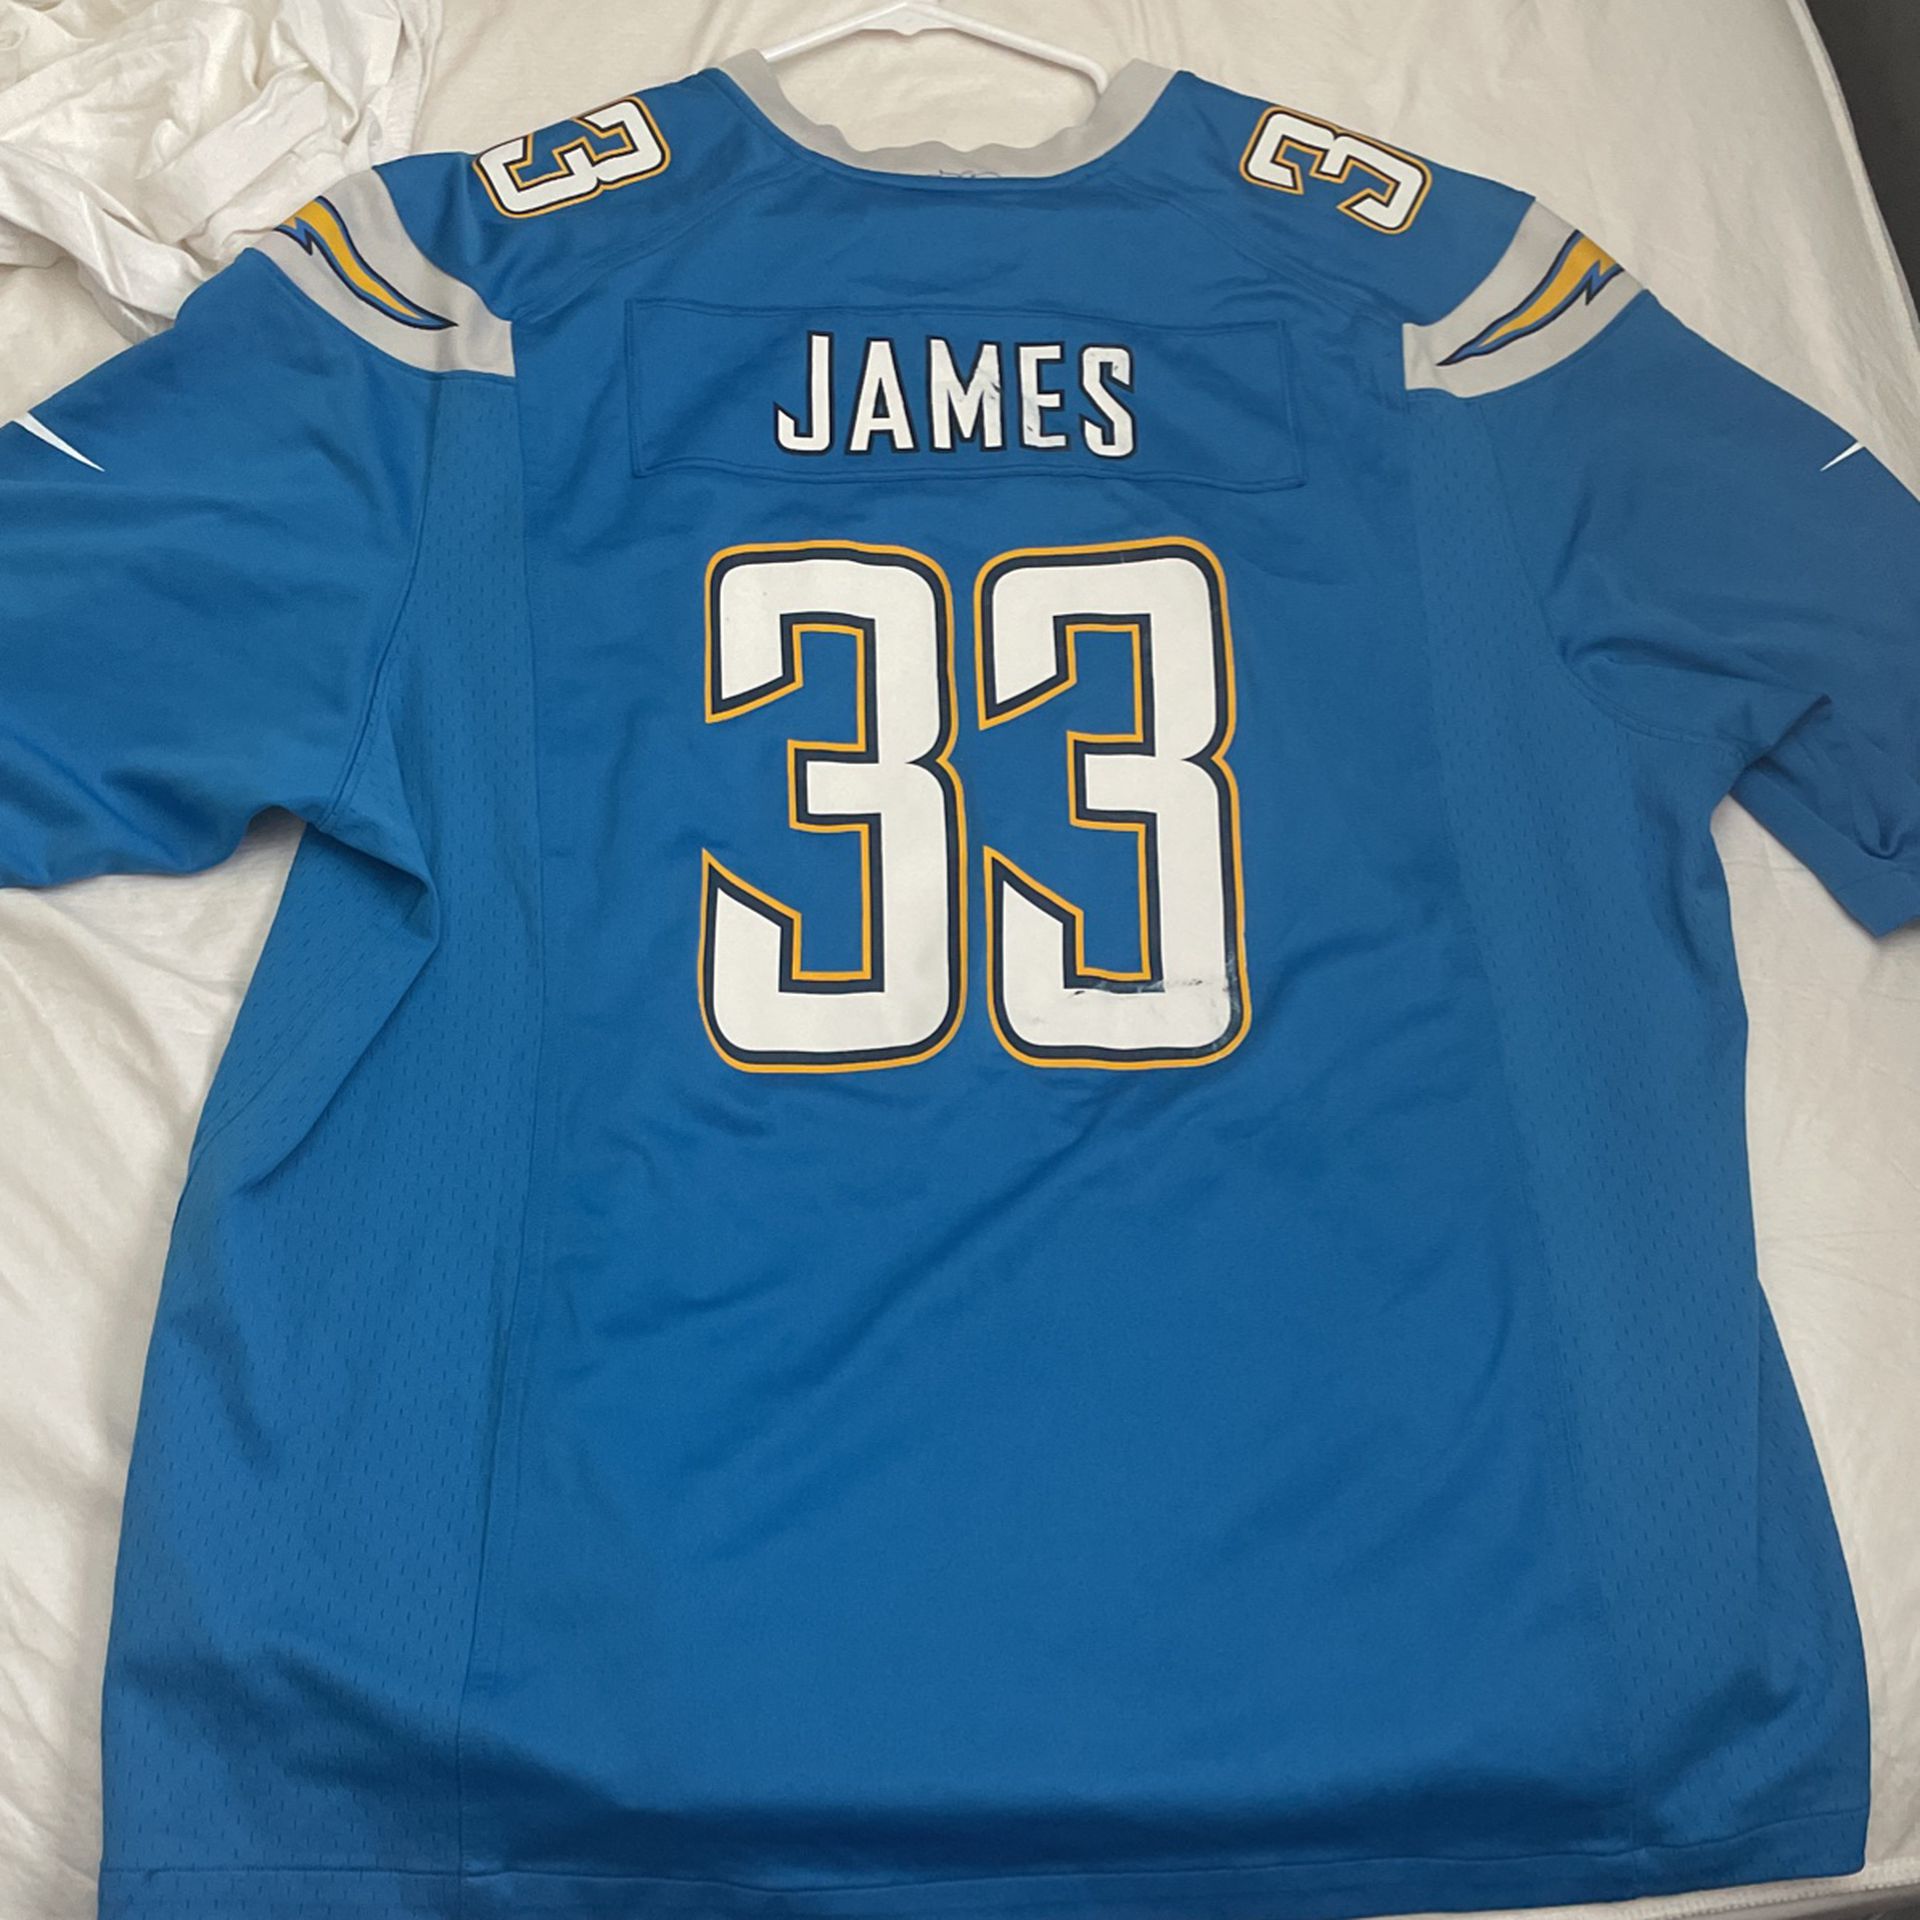 Los Angeles Chargers Jersey 2018 Rookie Season Derwin James Jersey-Official NFL Shop Jersey